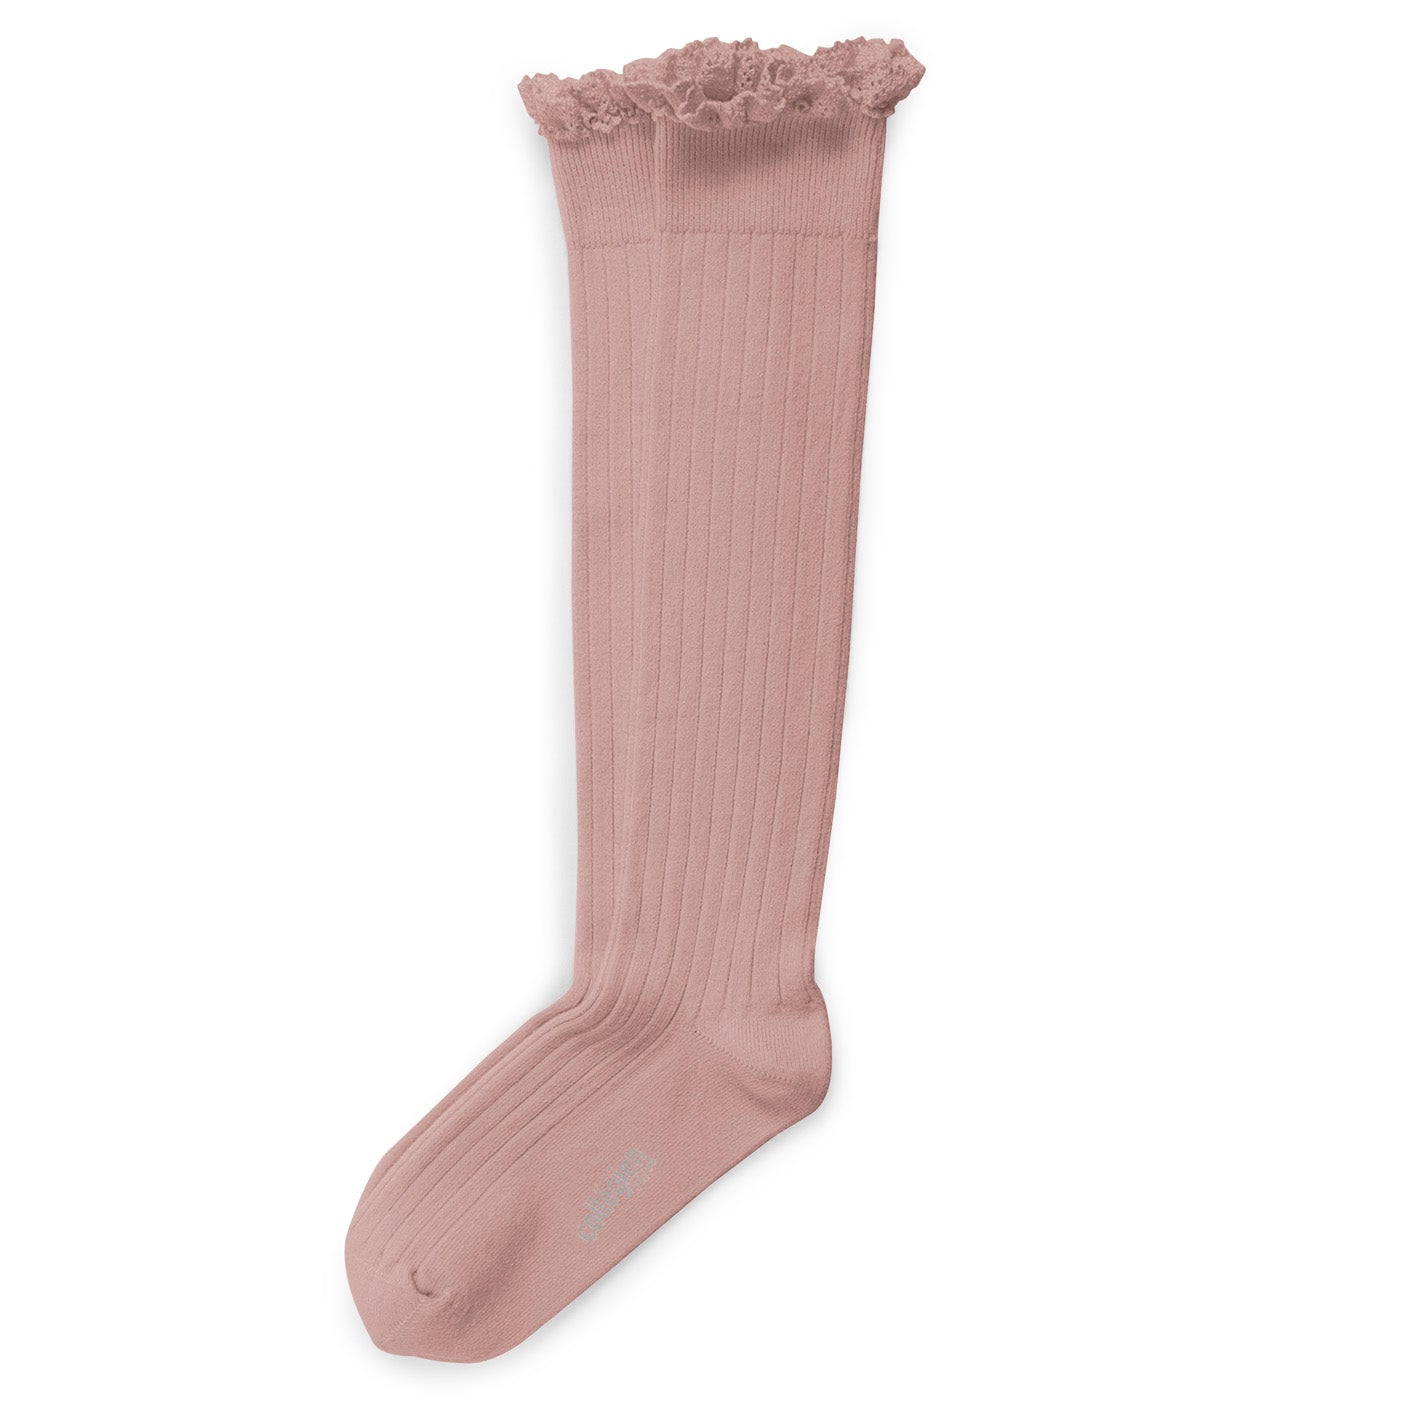 Joséphine Vieux Rose - Knee Socks with Lace